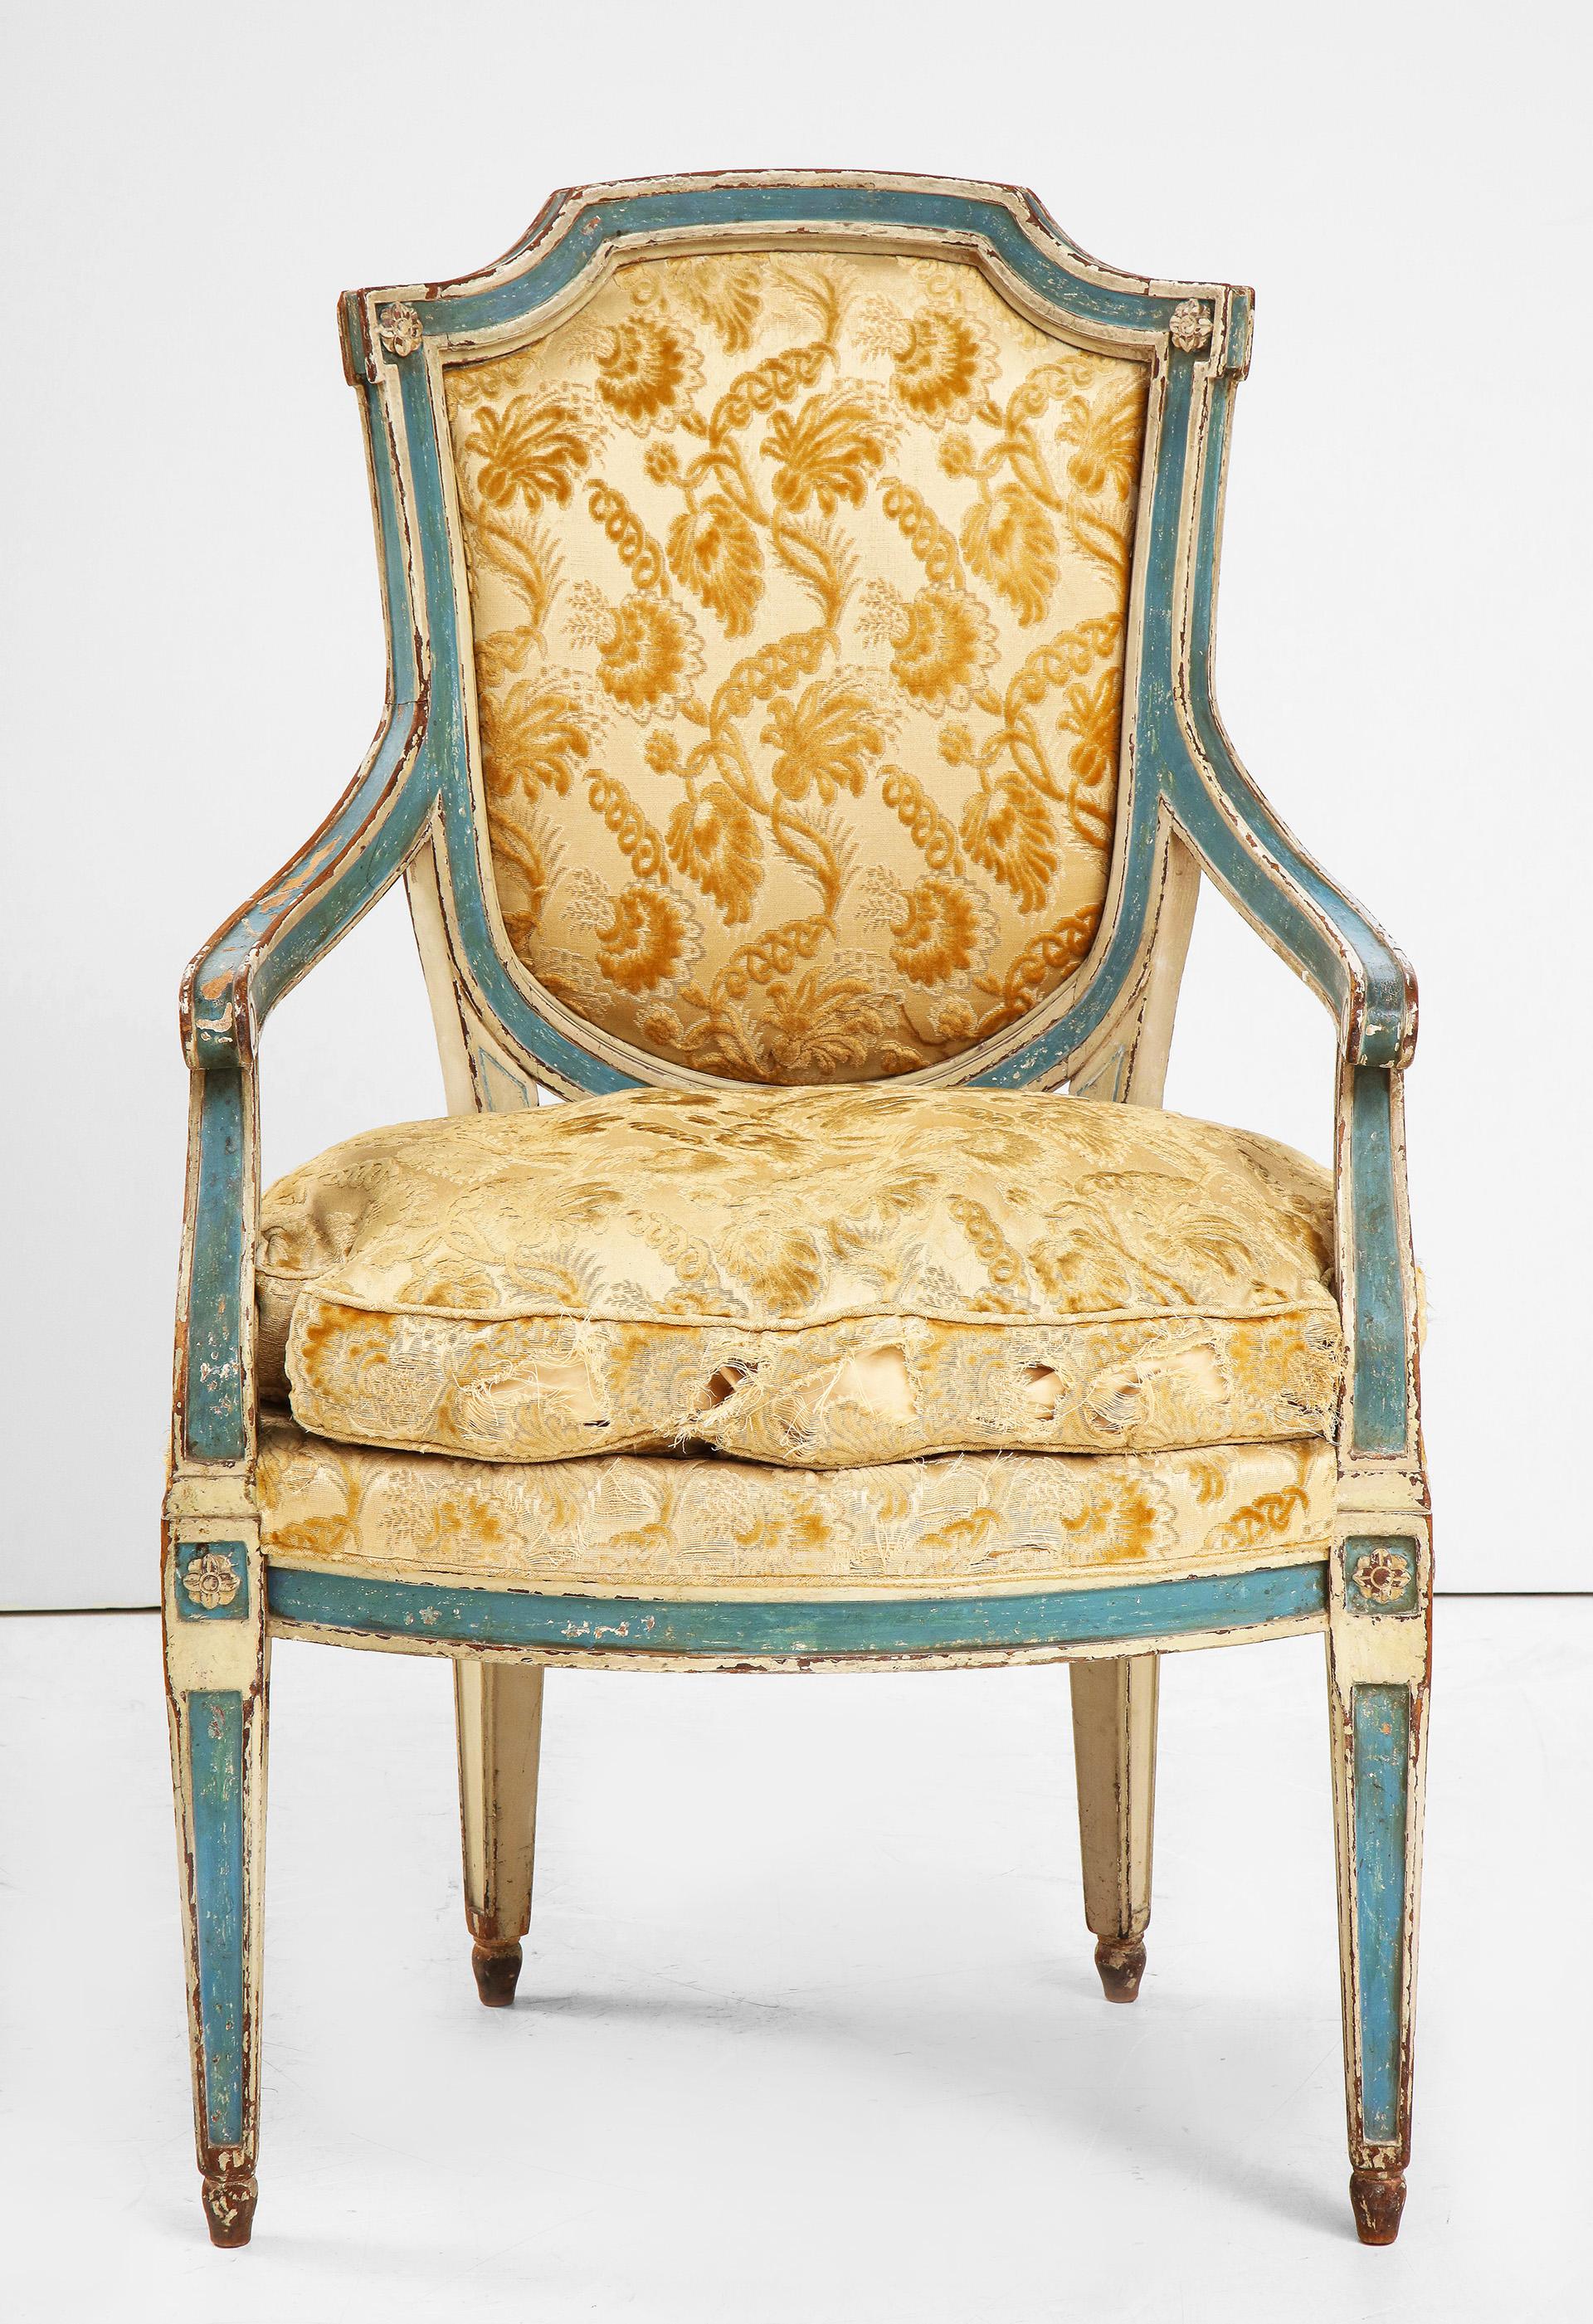 The Louis XVI Style chairs, painted in Cream and Robin's Egg Blue and covered in their original upholstery.
First used by the Kennedys at their Georgetown house (at least 1 photo shows Jackie seated in one at her desk). Possibly acquired through